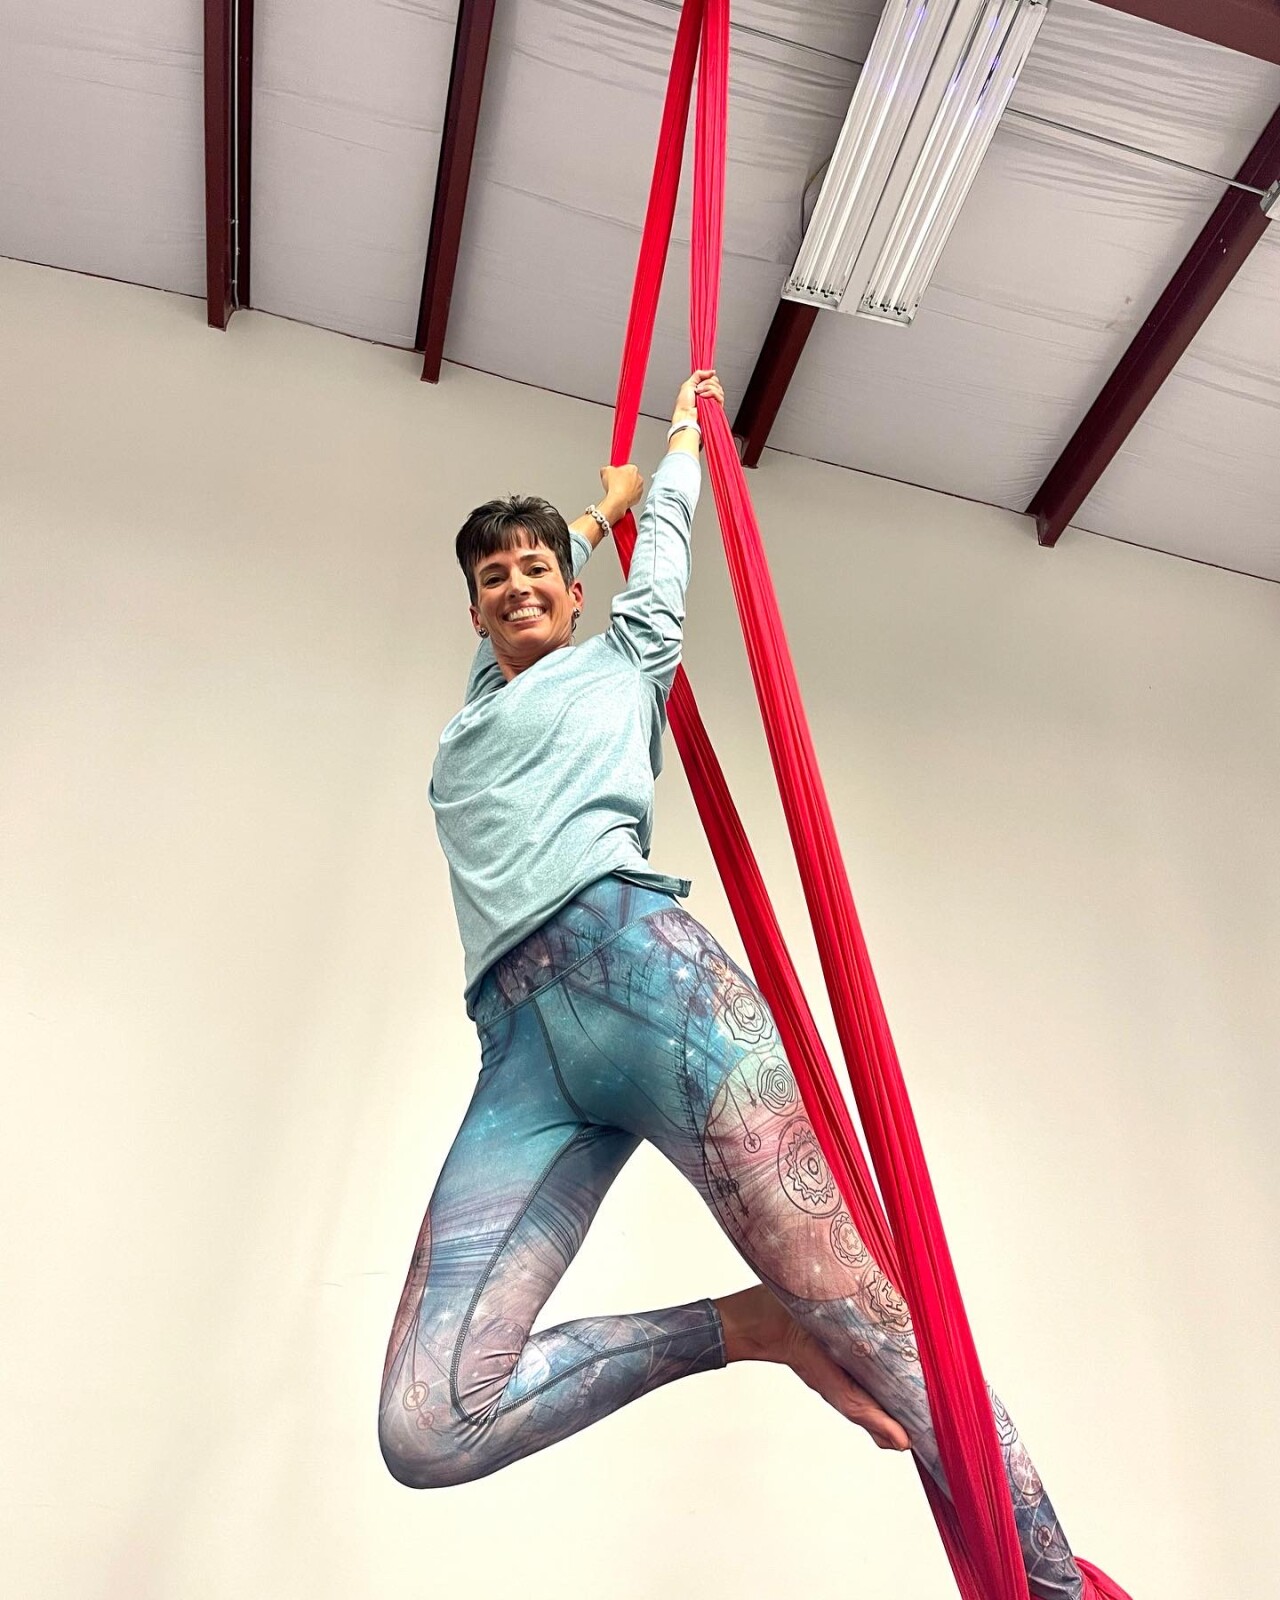 5 Life Lessons I learned from Aerial Silks Class